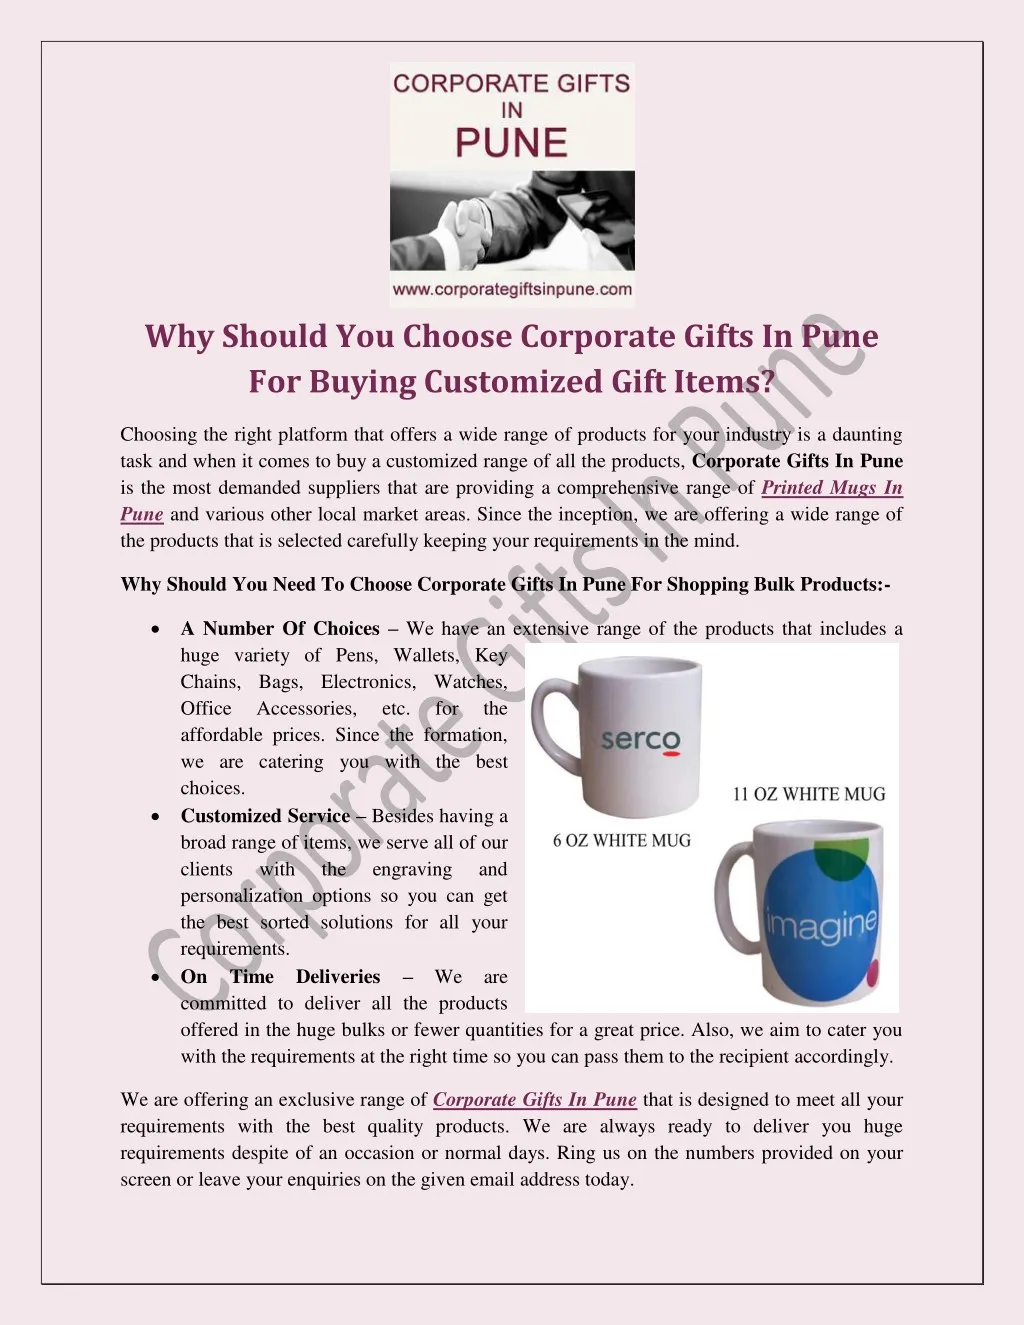 why should you choose corporate gifts in pune